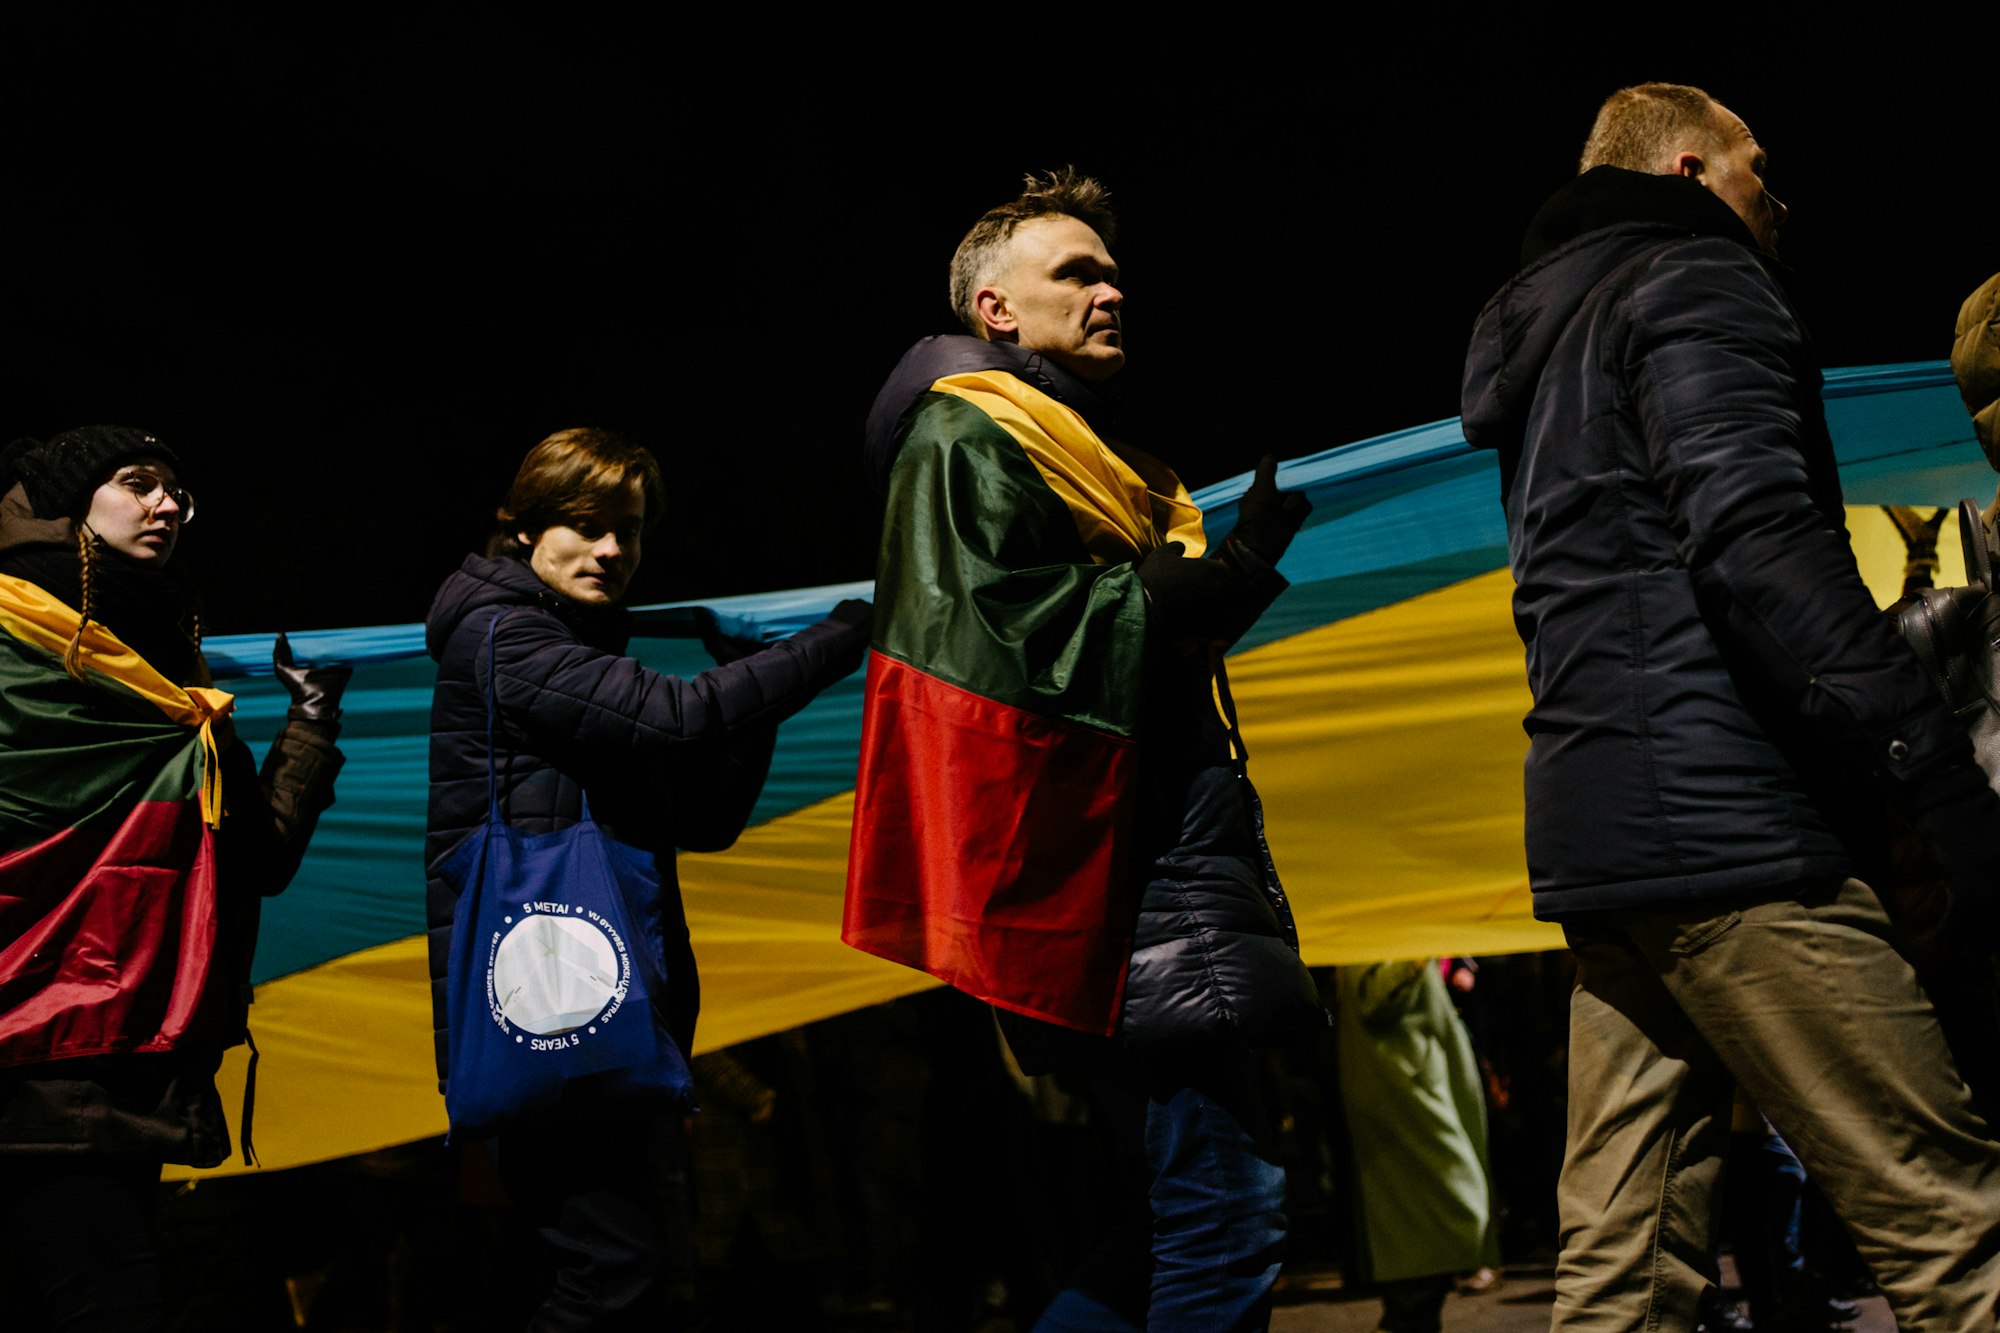 Lithuanian people protesting agains Russian invasion of Ukraine